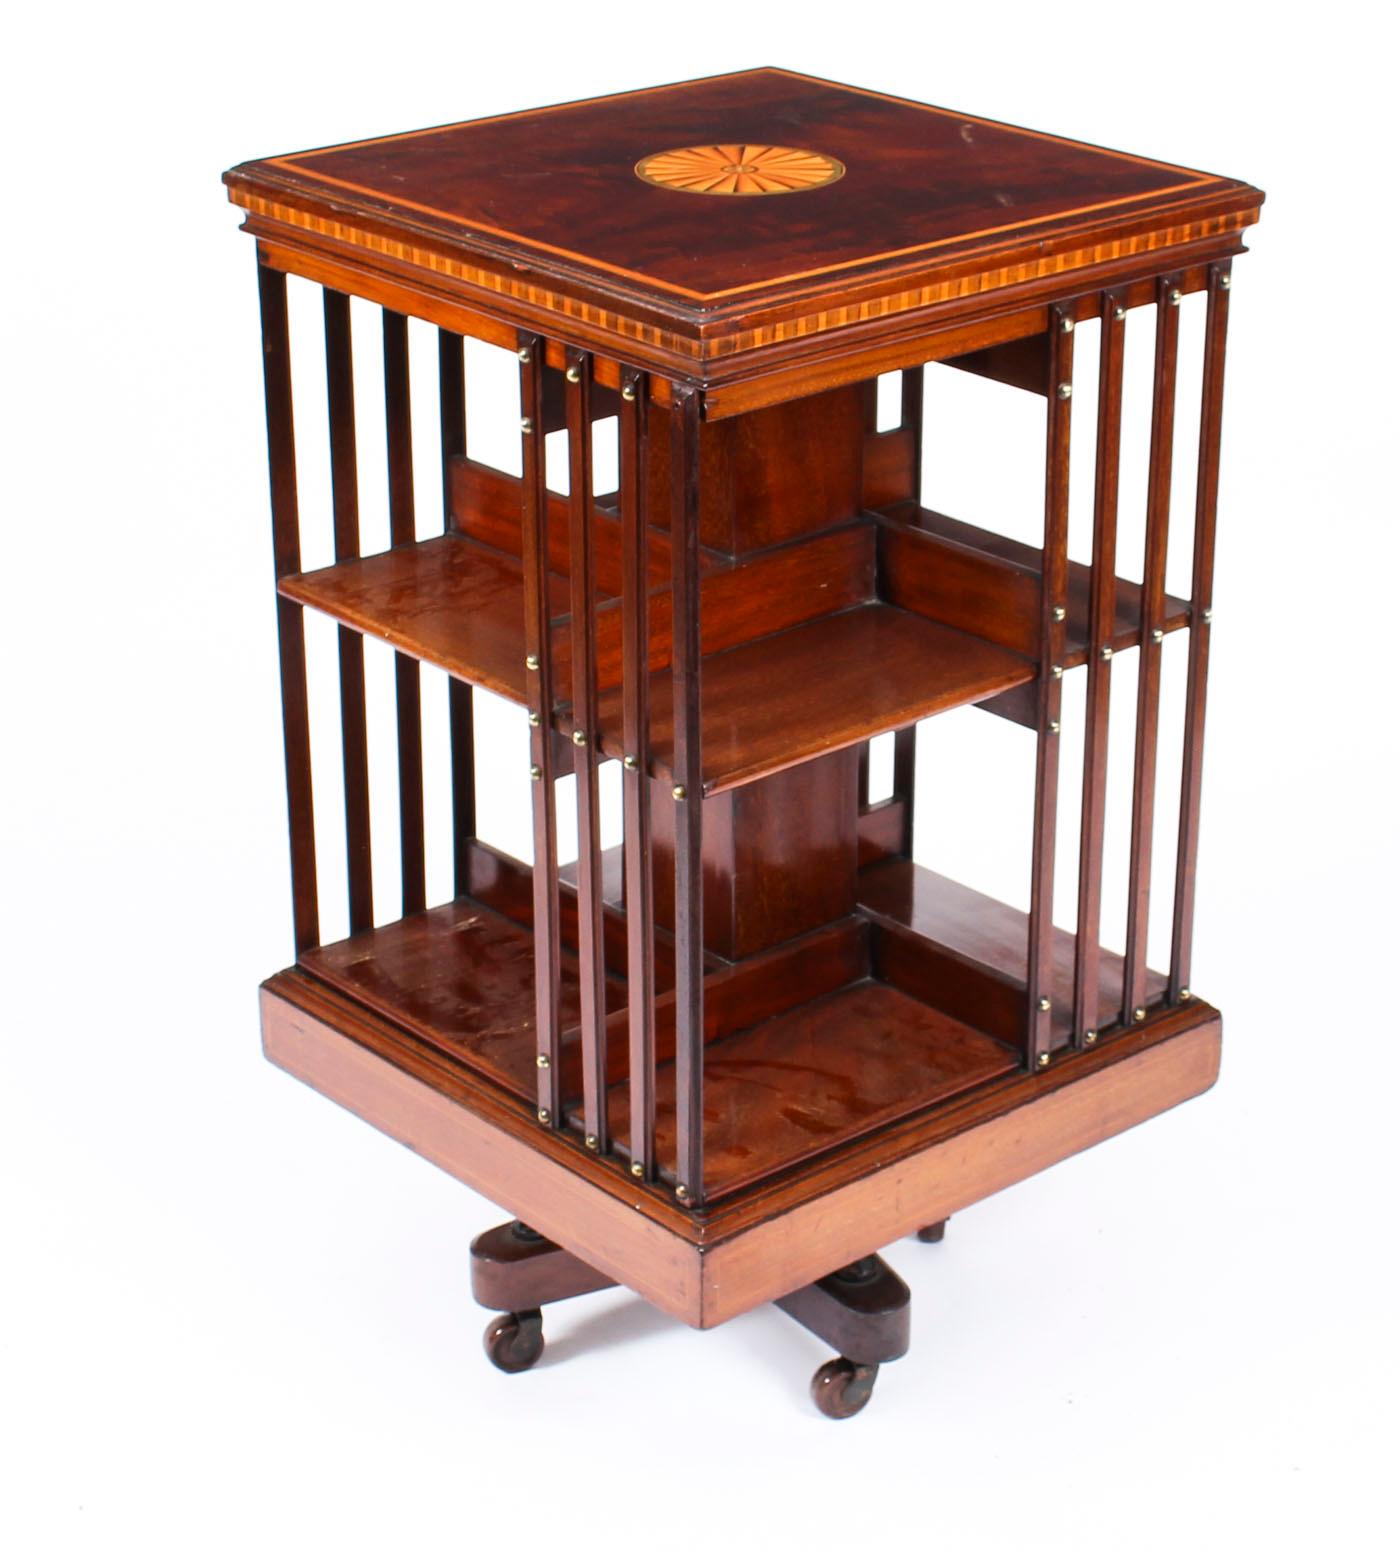 This an exquisite antique revolving bookcase attributed to the renowned Victorian retailer and manufacturer Maple & Co., circa 1900.

It is made of mahogany , revolves on a solid cast iron base, has inlaid boxwood lines to the top and bottom, the